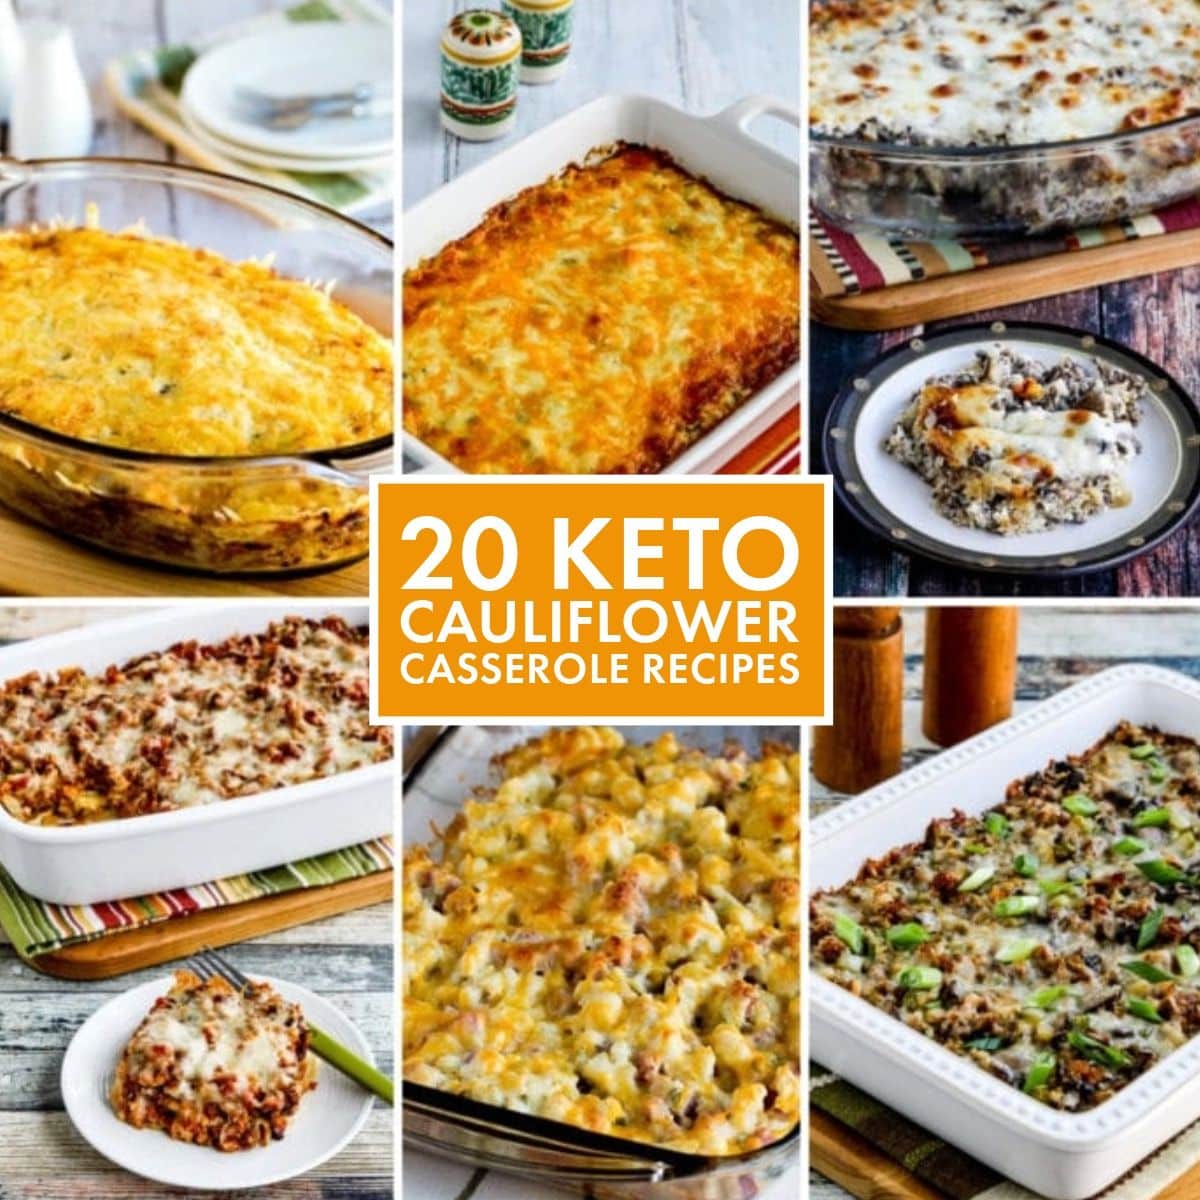 Collage photo for 20 Keto Cauliflower Casserole Recipes showing featured recipes.